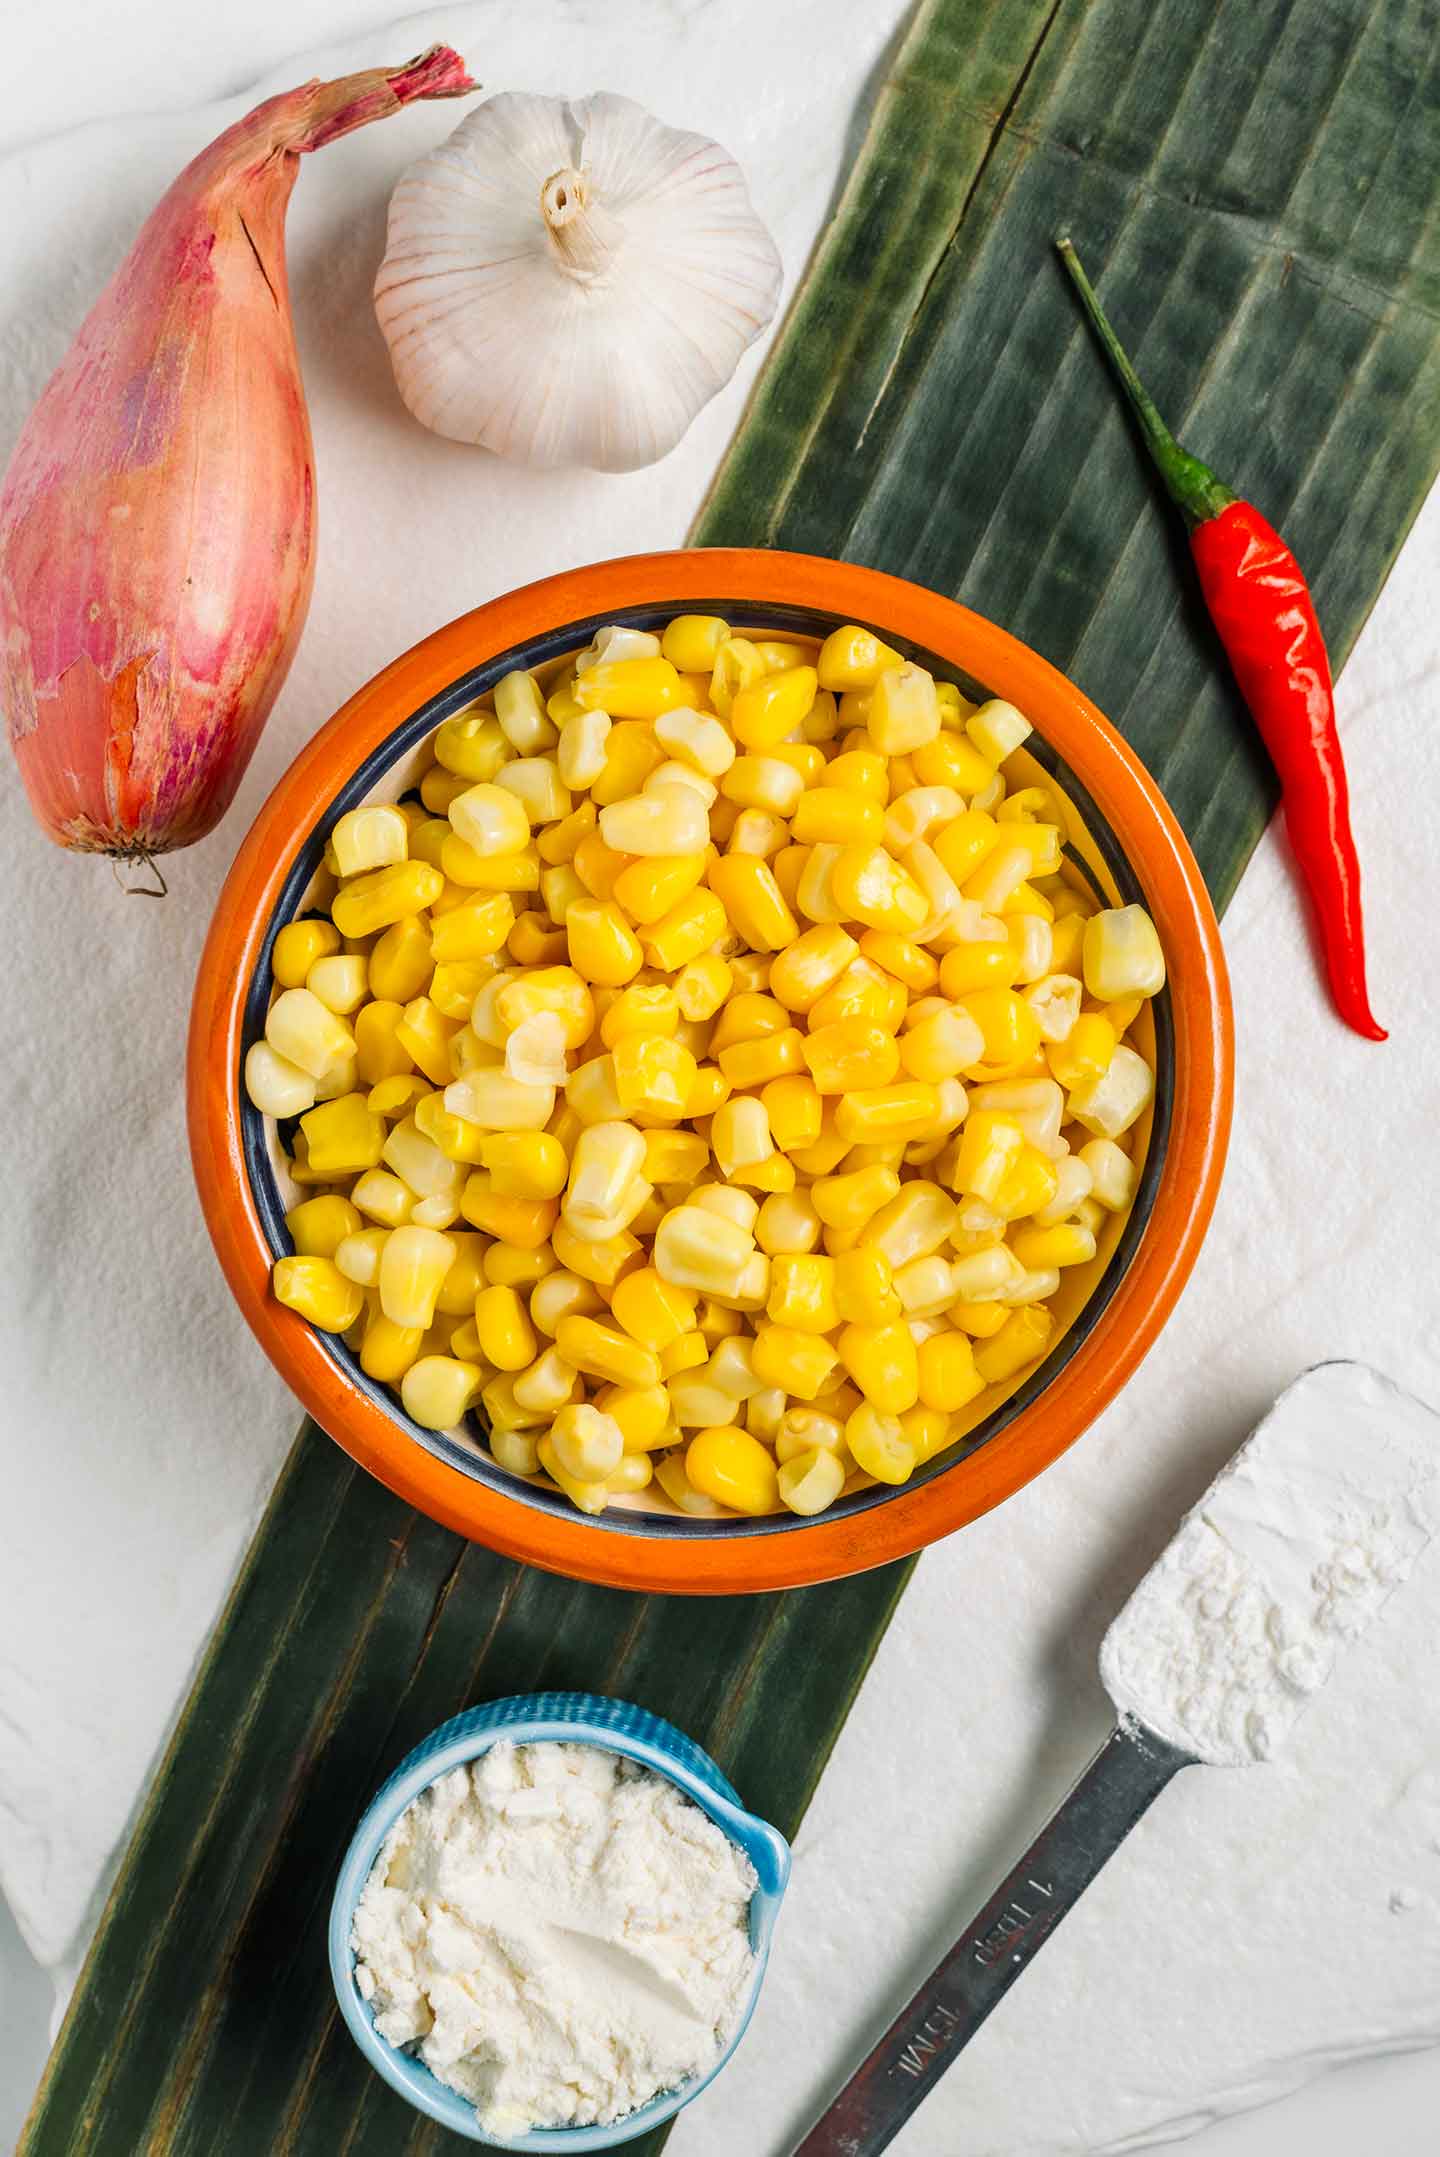 Top down view of ingredients for vegan Indonesian corn fritters. Corn kernels fill a small bowl surrounded by garlic, shallot, red chili, cornstarch, and flour.